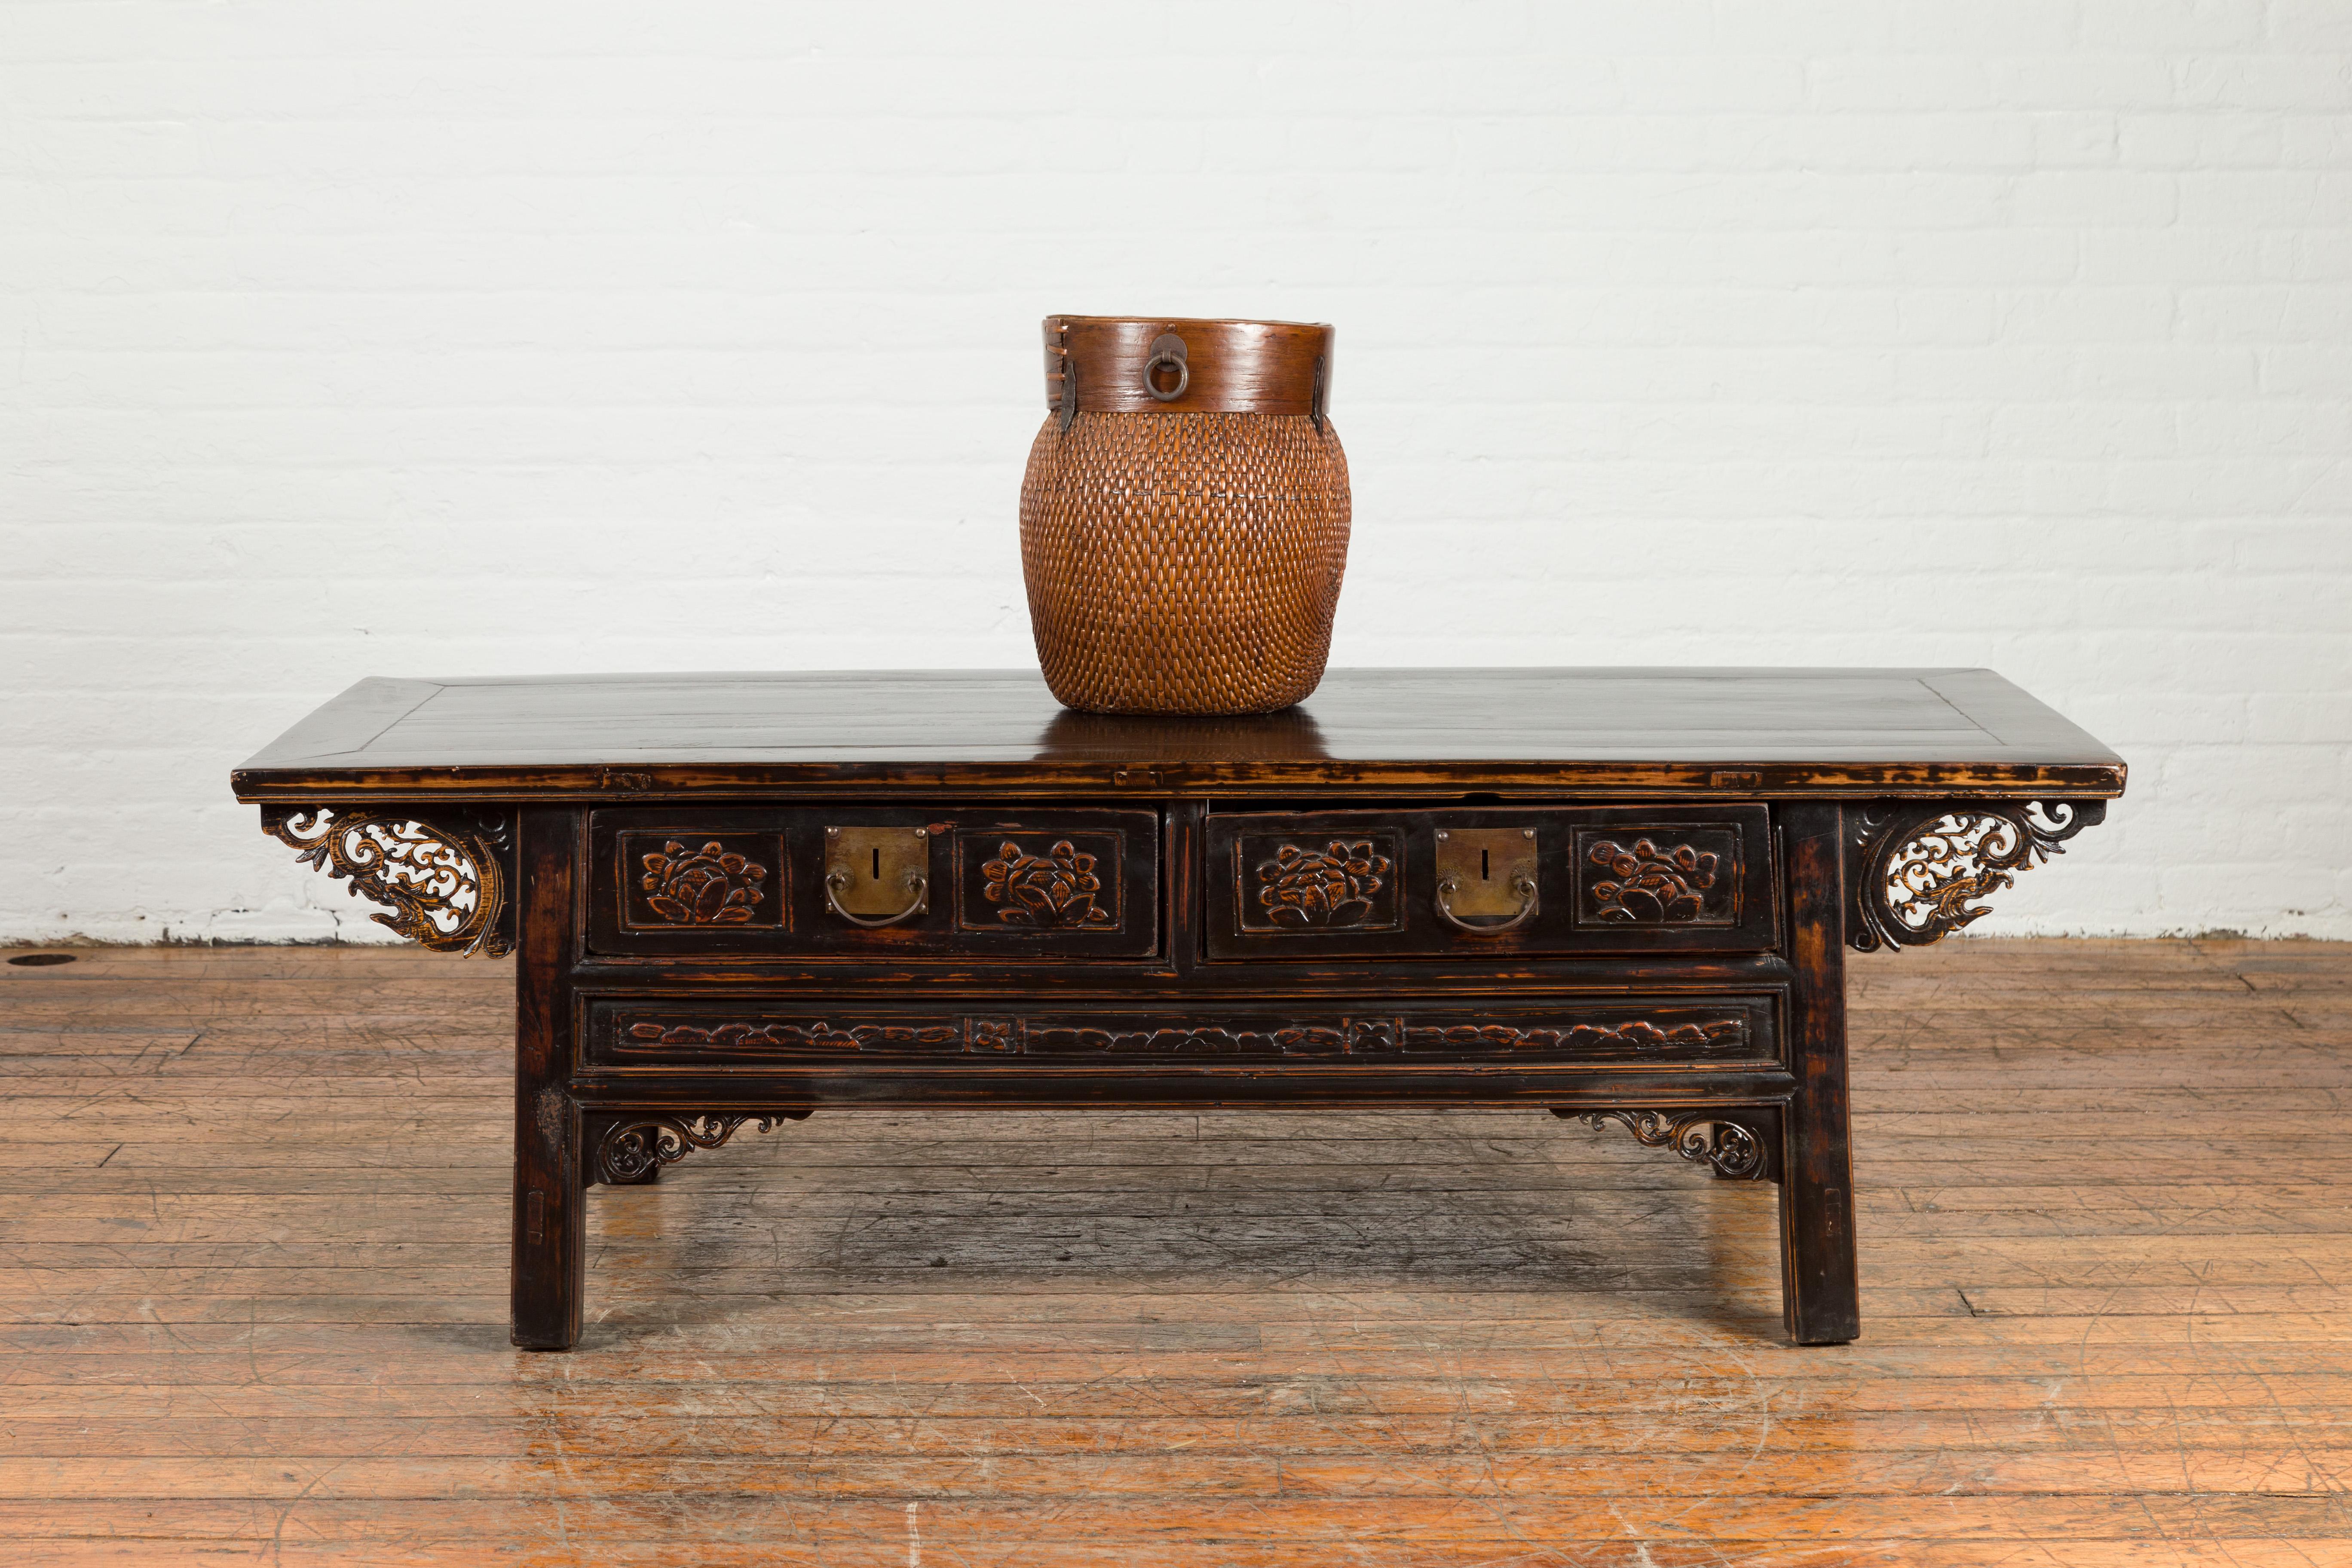 A Chinese Qing Dynasty antique black lacquer coffee table from the 19th century, with two drawers, dragon-carved spandrels and raised motifs. Created in China during the Qing Dynasty, this coffee table features a rectangular top with central board,